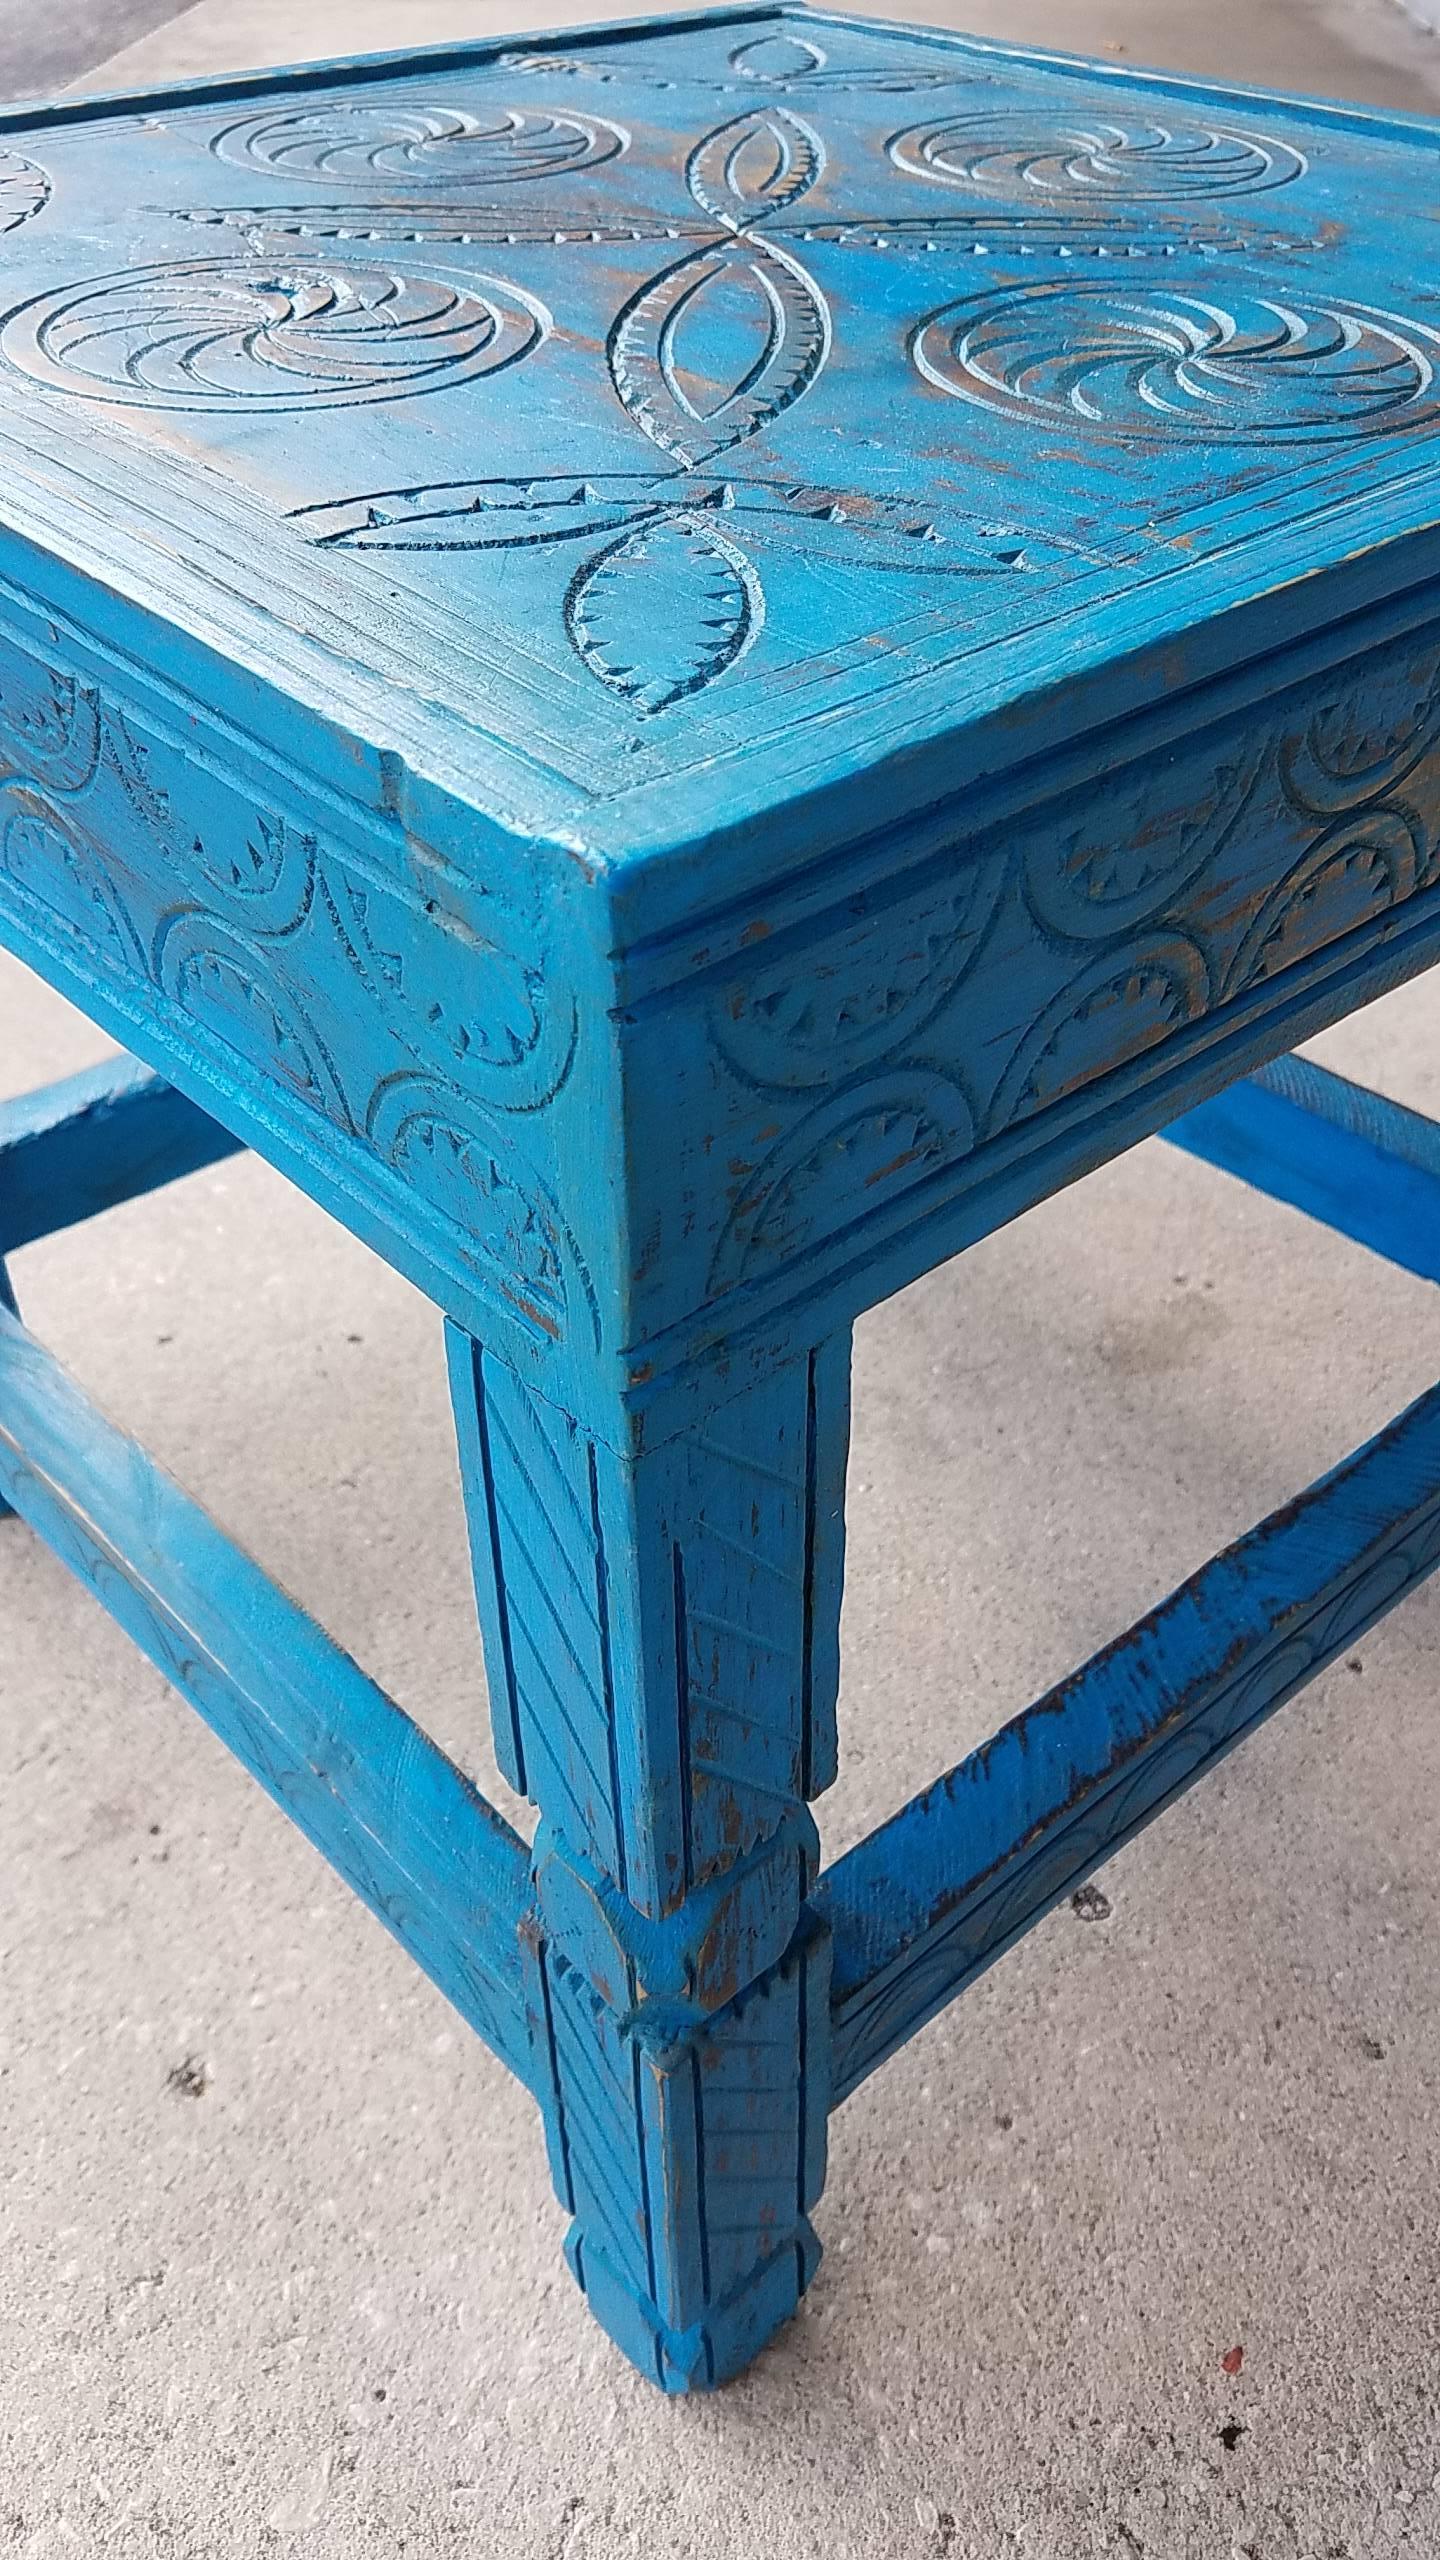 This is a beautiful Moroccan side table made of aged cedar wood, and painted in a rare dark turquoise color. Also available in off-white, burnt burgundy, and light turquoise. This amazing table measures approximately 16